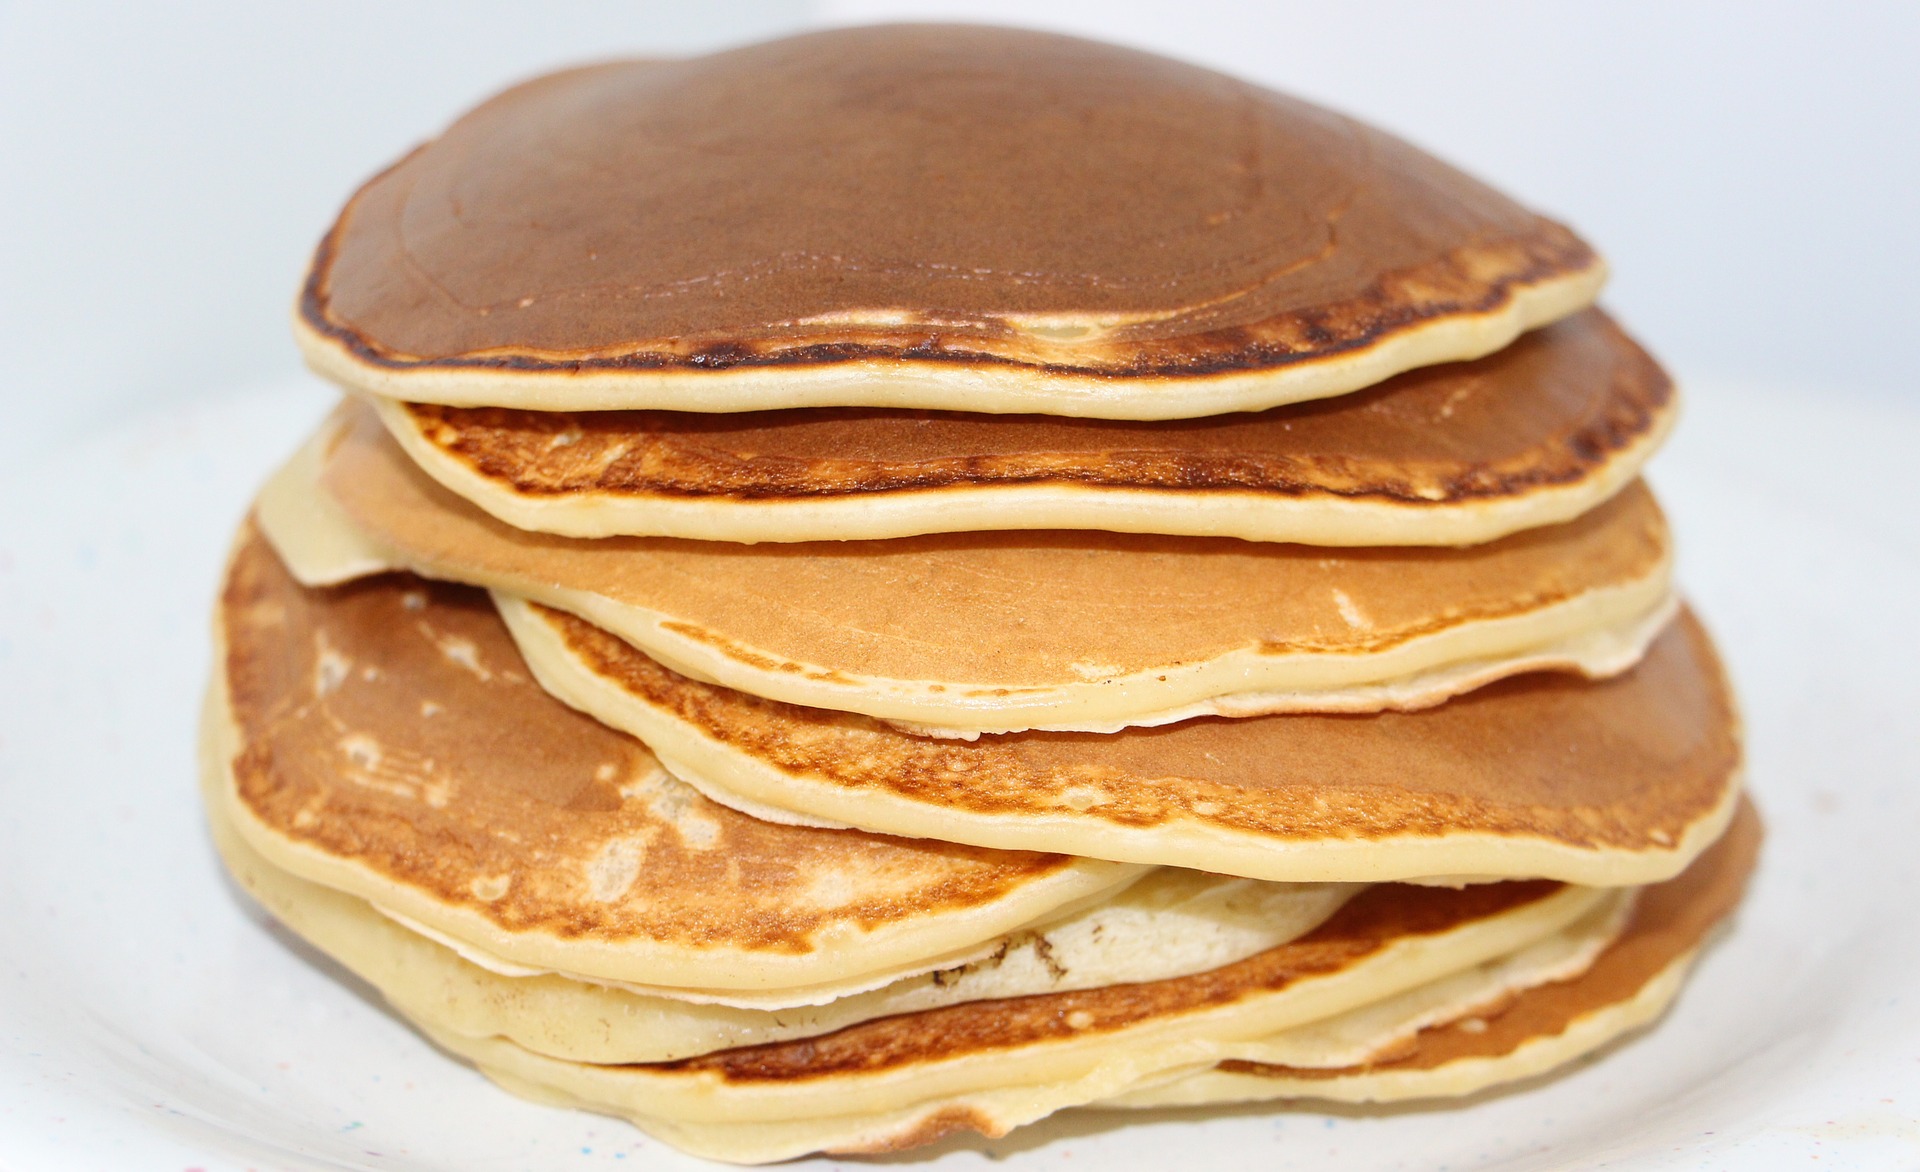 A stack of golden-brown pancakes.